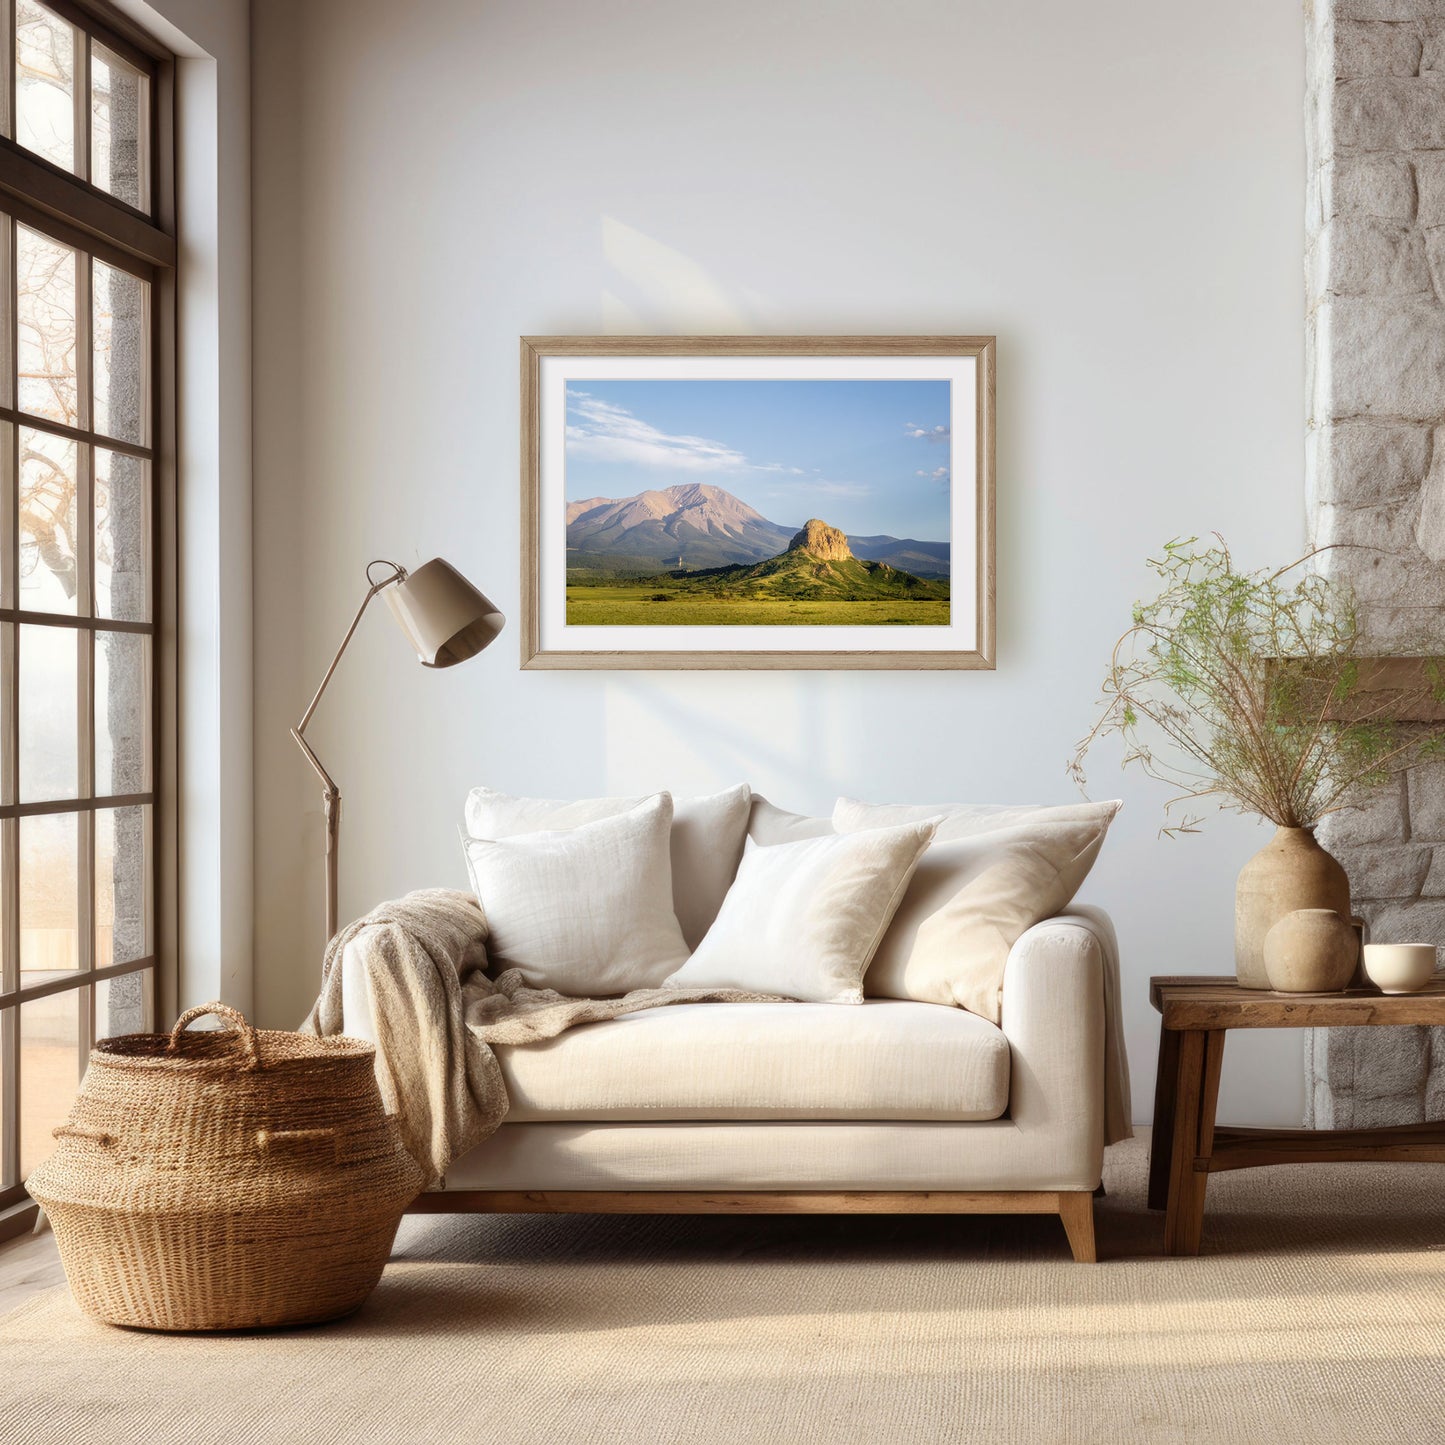 Colorado's Goemmer Butte, beautifully captured in this nature photography print, offers a glimpse into the serene landscapes and natural beauty ideal for wall art.